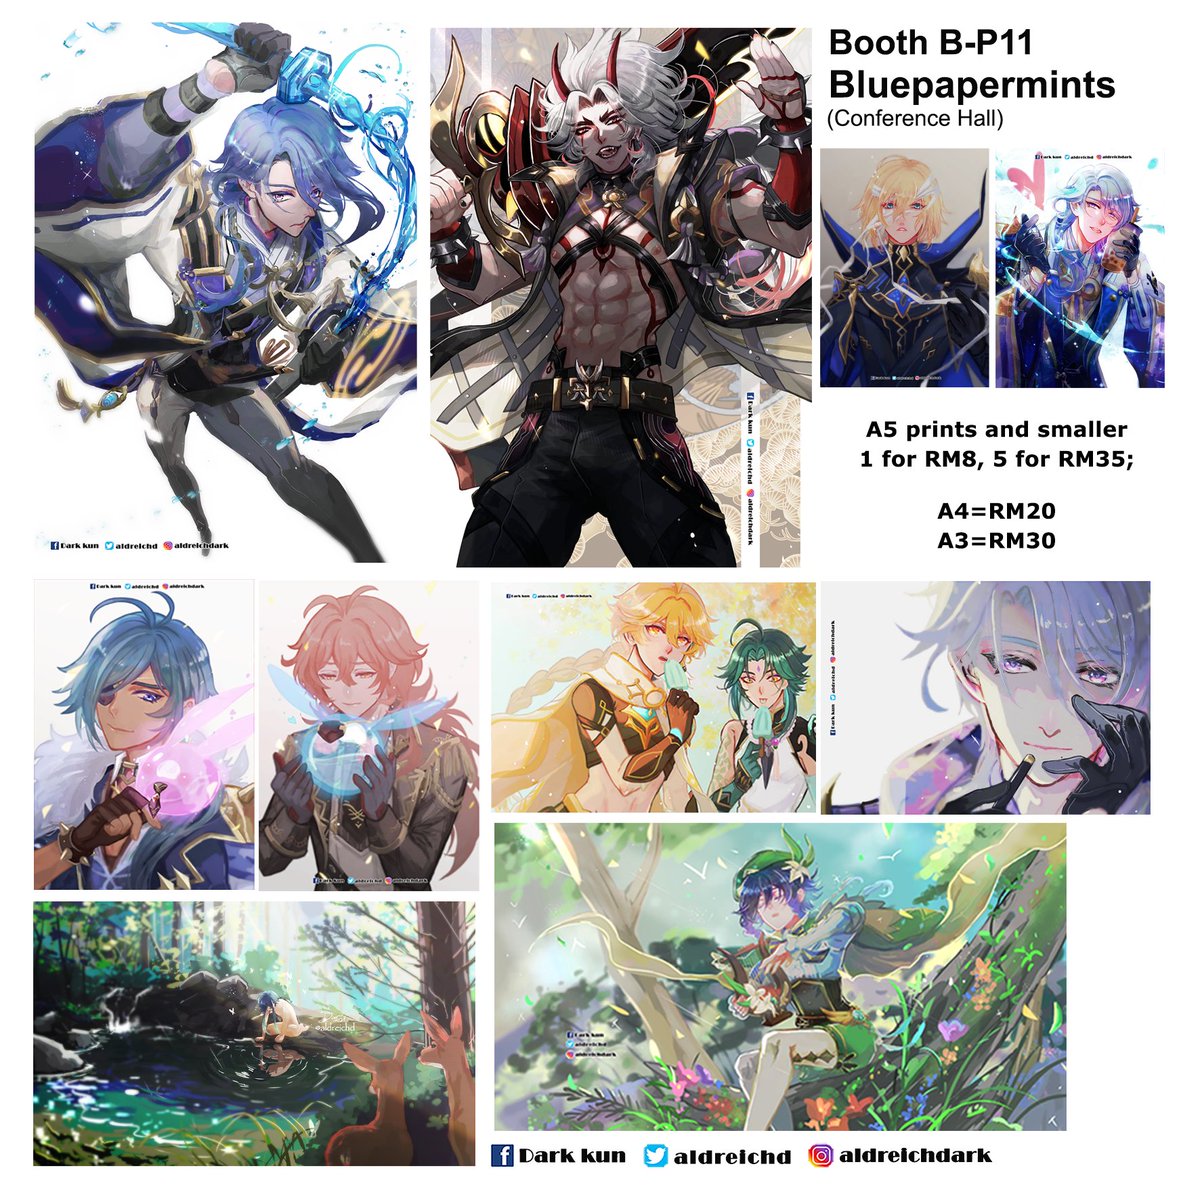 Comic Fiesta catalogue Part 2

Going with FULL Genshin Catalogue this round!

Booth B-P11 Bluepapermints (Level 3, Conference Hall)

#comicfiesta2022 #comicfiesta #cf2022 #genshinimpact 